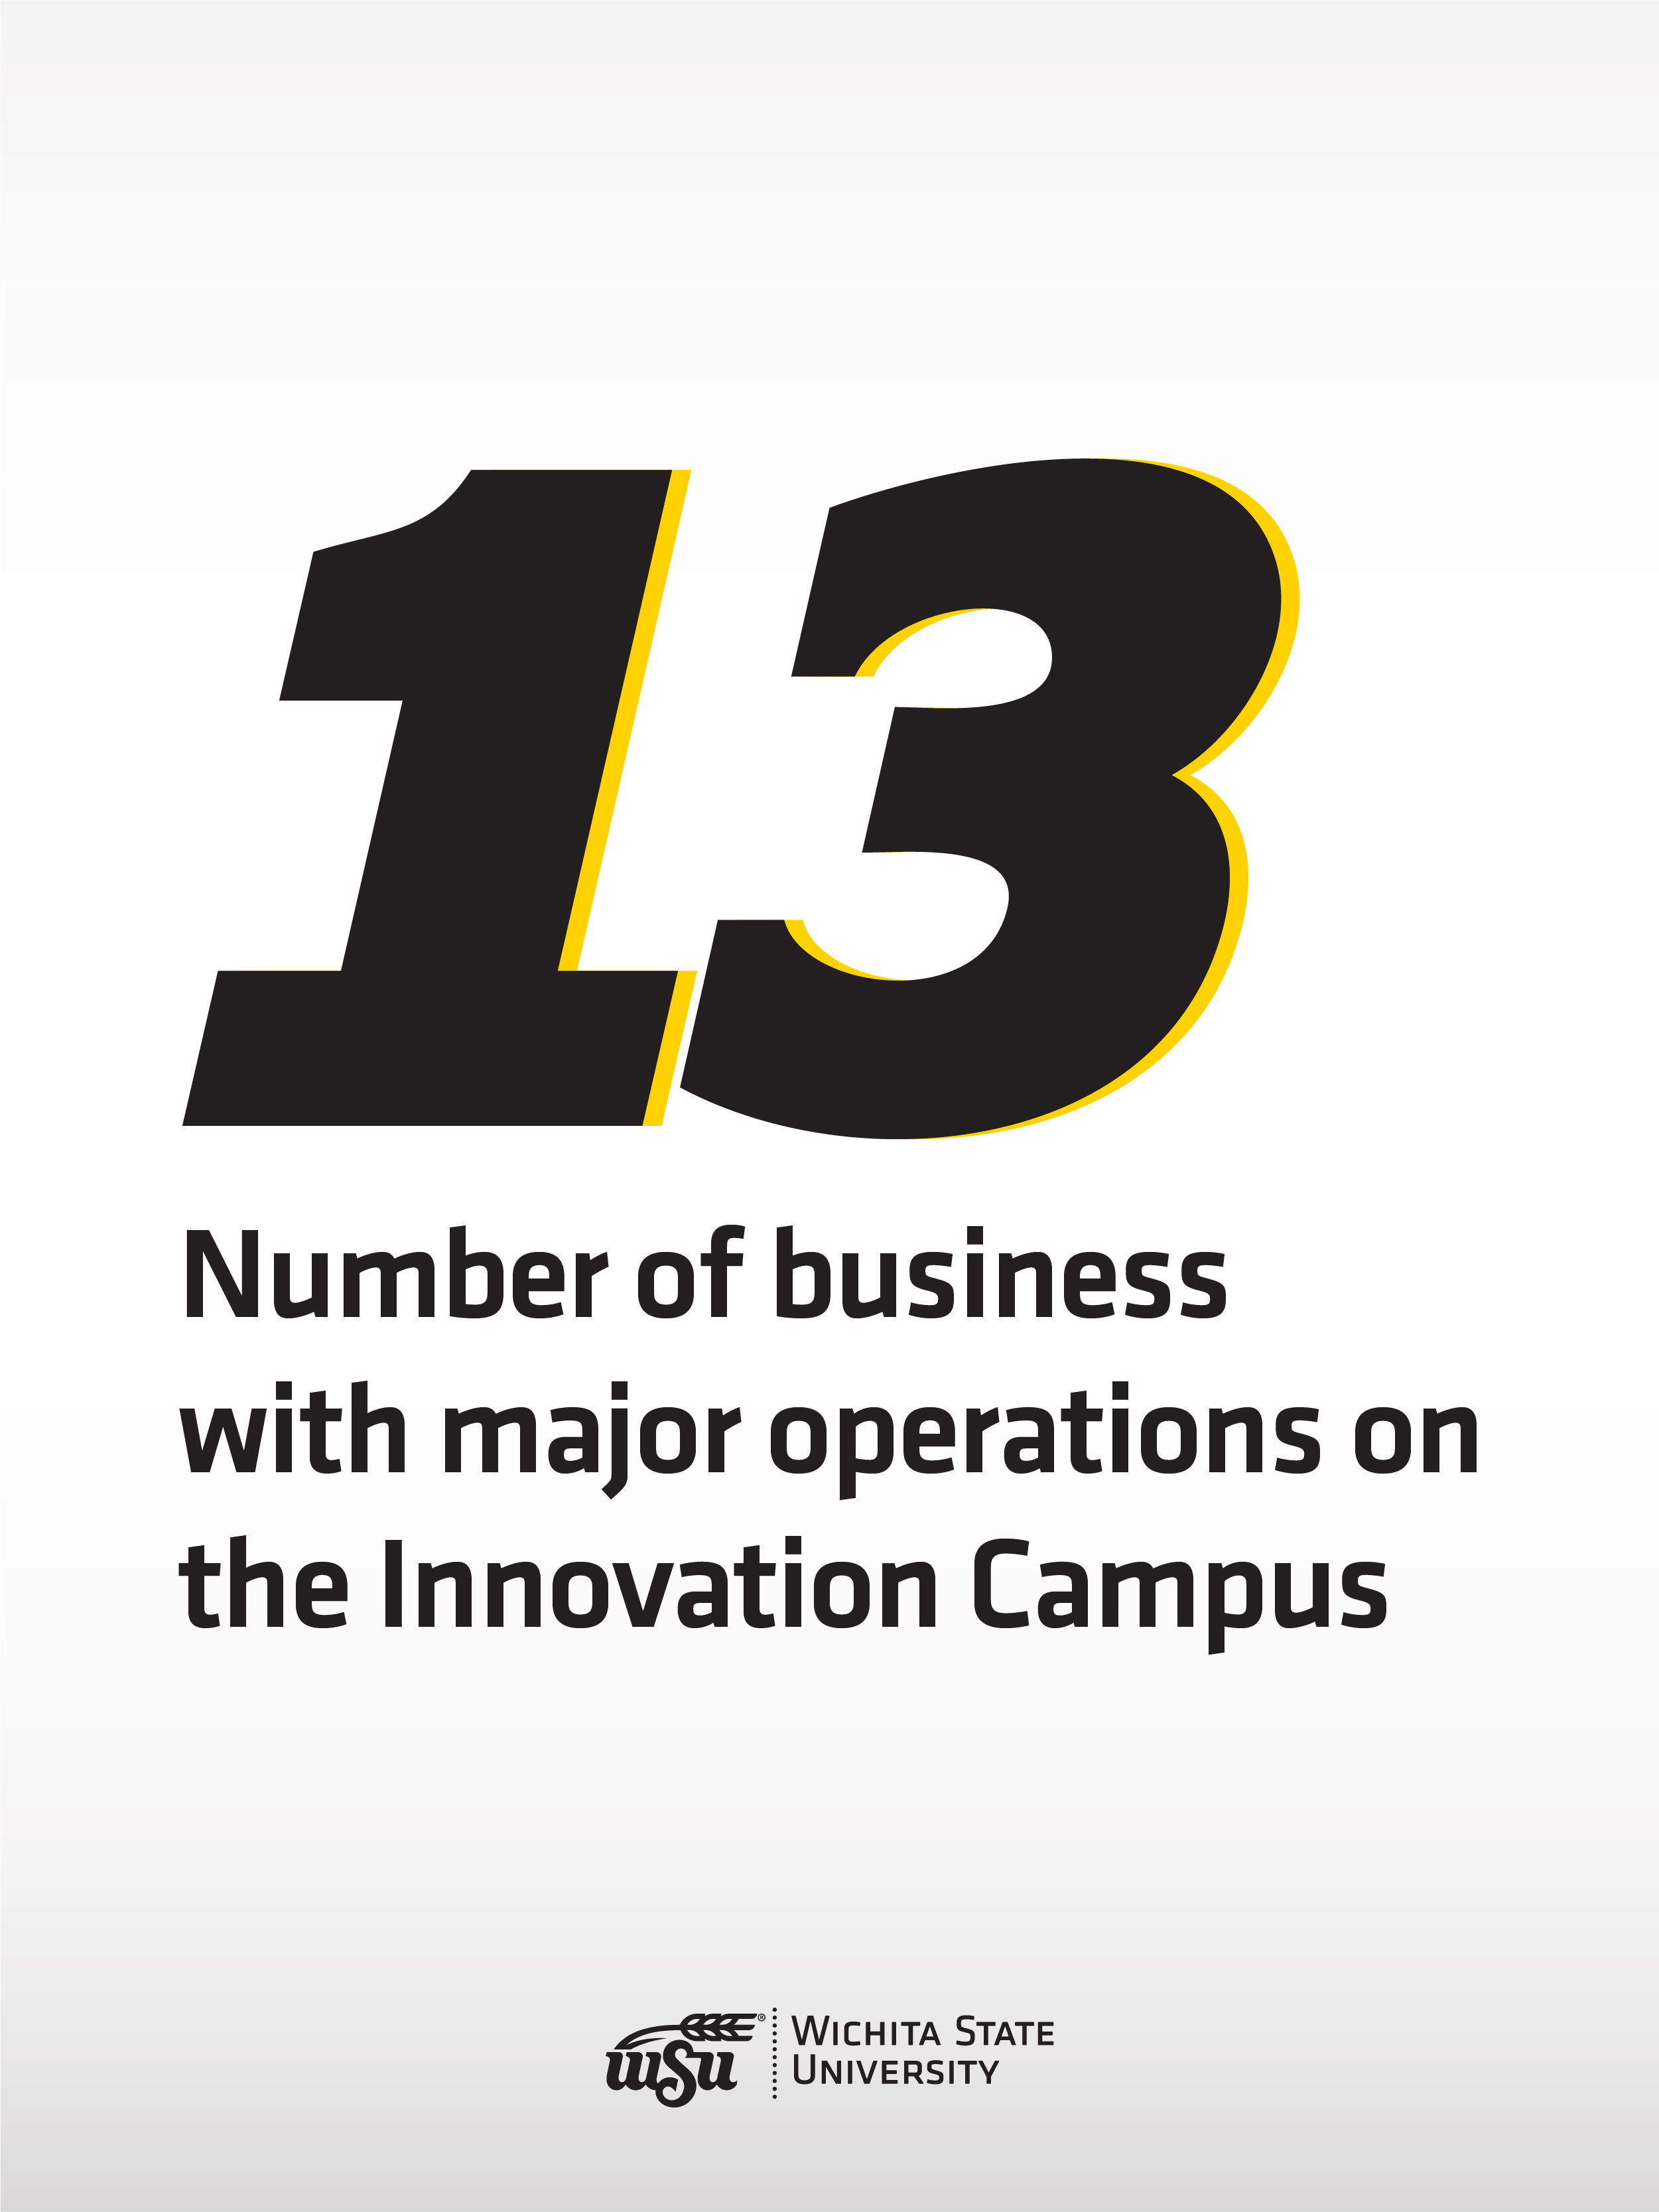 13 businesses have homes on the Innovation Campus.